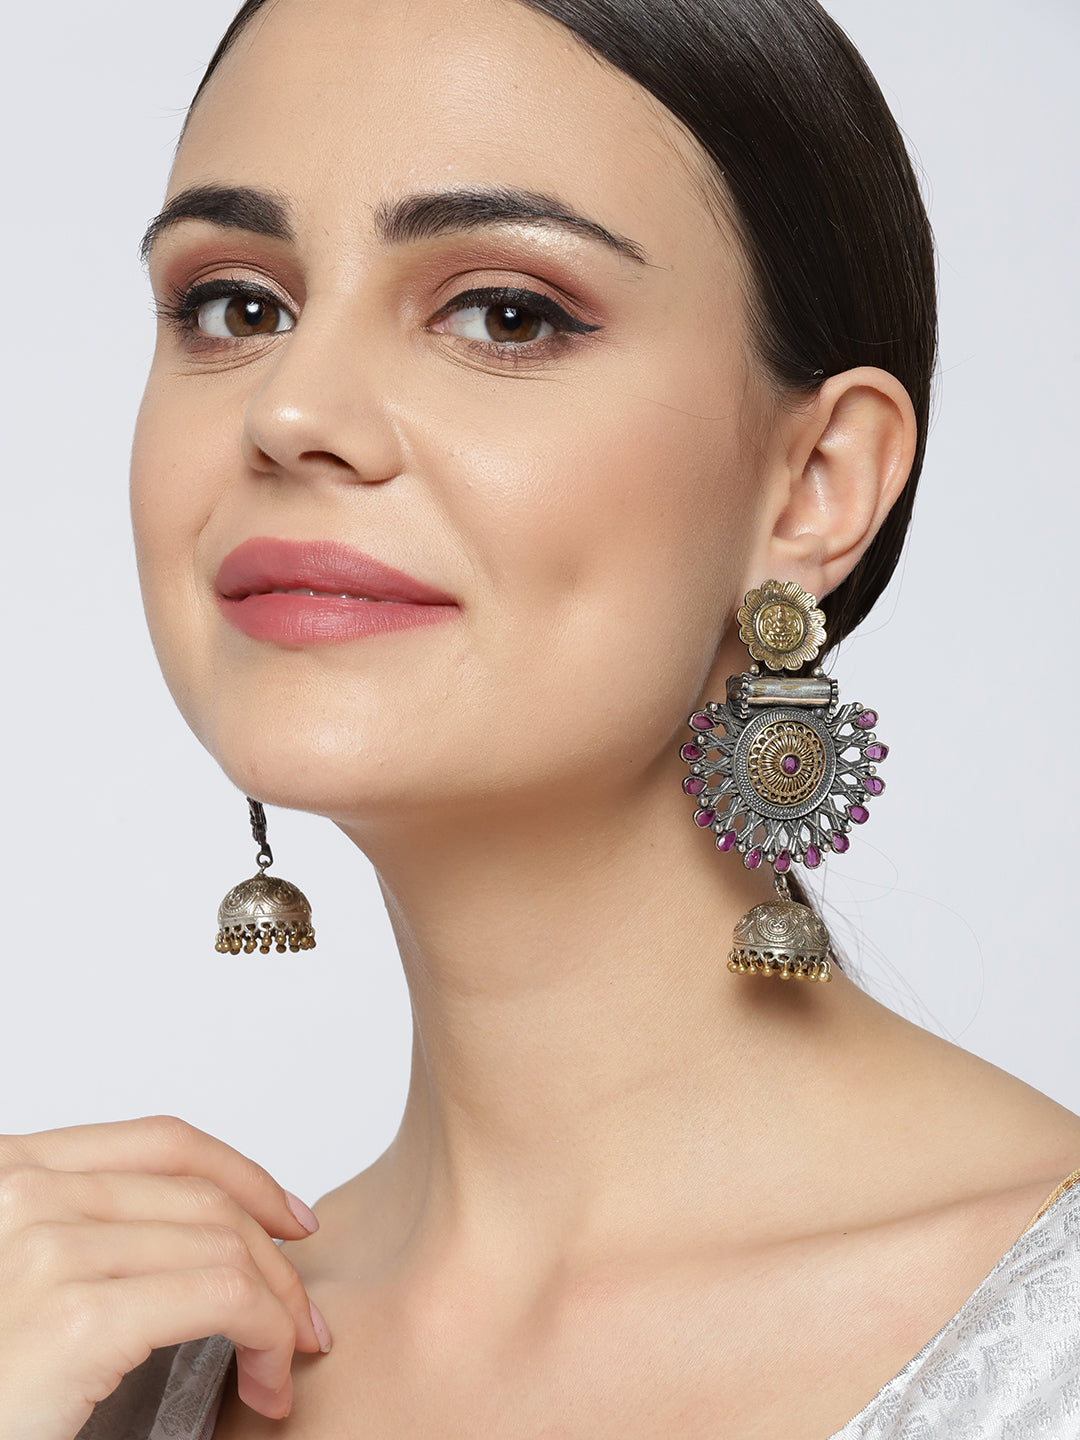 Oxidized Dual Toned Magenta Stones Studded Antique Drop Earrings in Floral Pattern